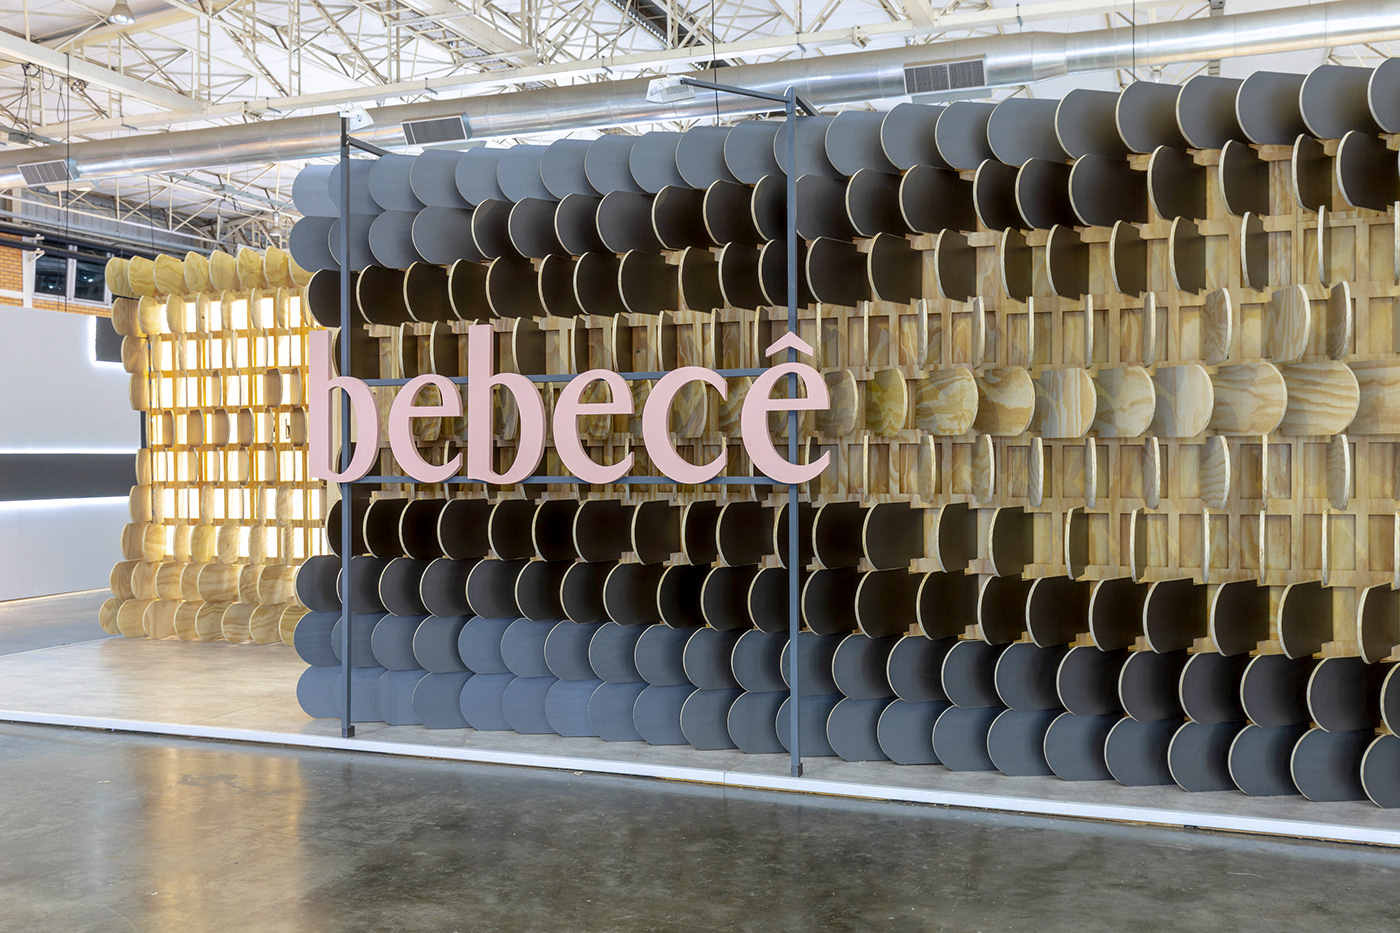 Retail Bebece shoes Stand feira Sicc that That Design Company stand design Exhibition Design 